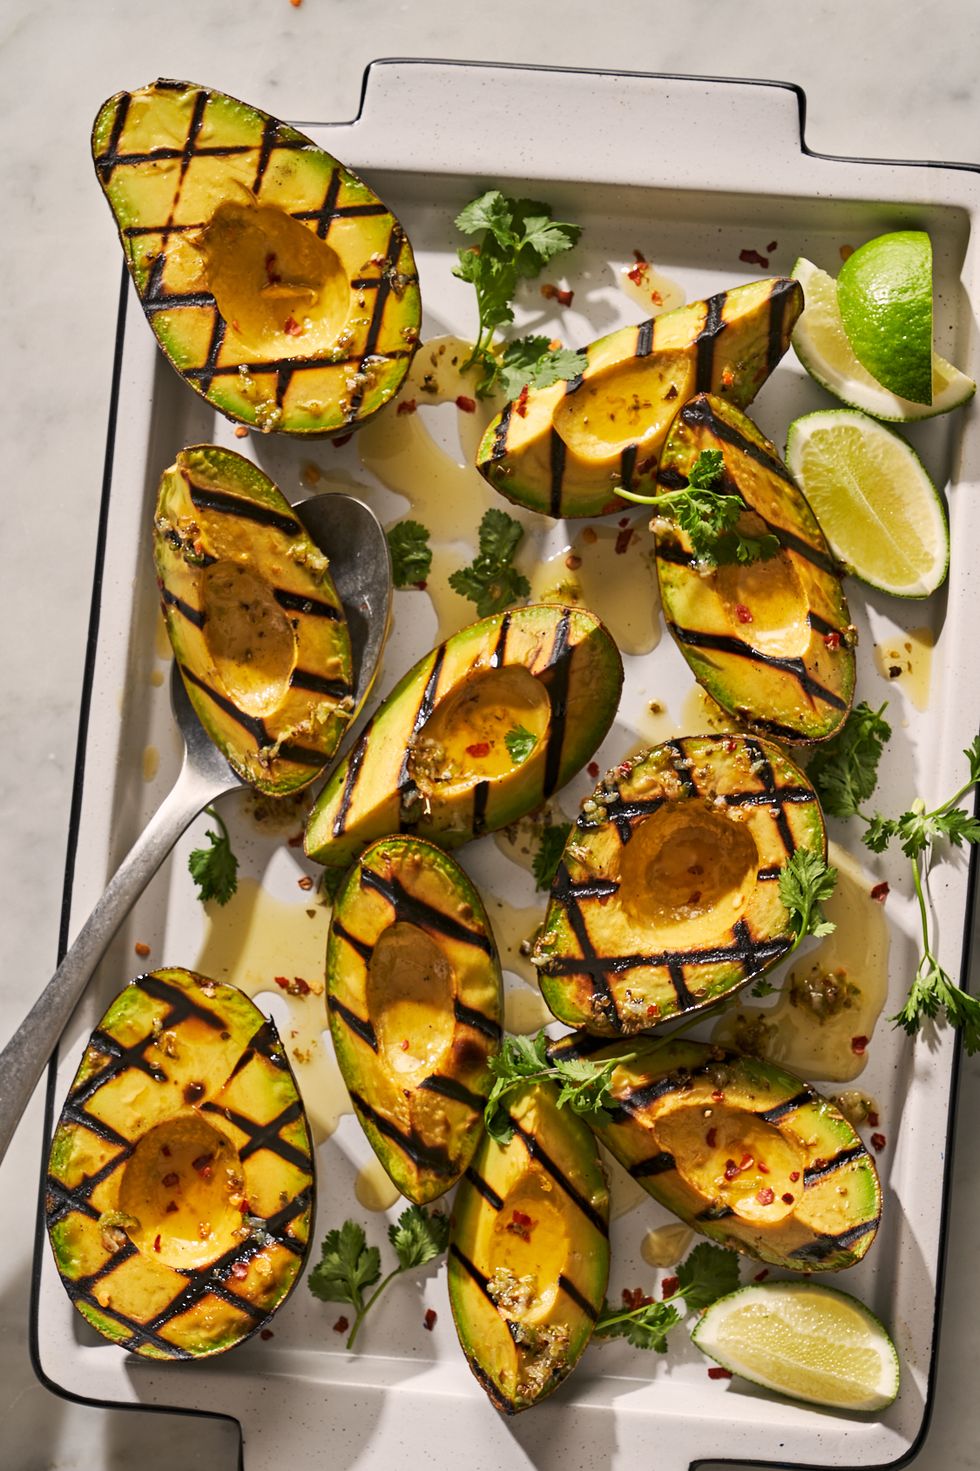 https://hips.hearstapps.com/hmg-prod/images/grilled-avocados2-1654092347.jpg?crop=0.888xw:0.889xh;0.0646xw,0.0454xh&resize=980:*